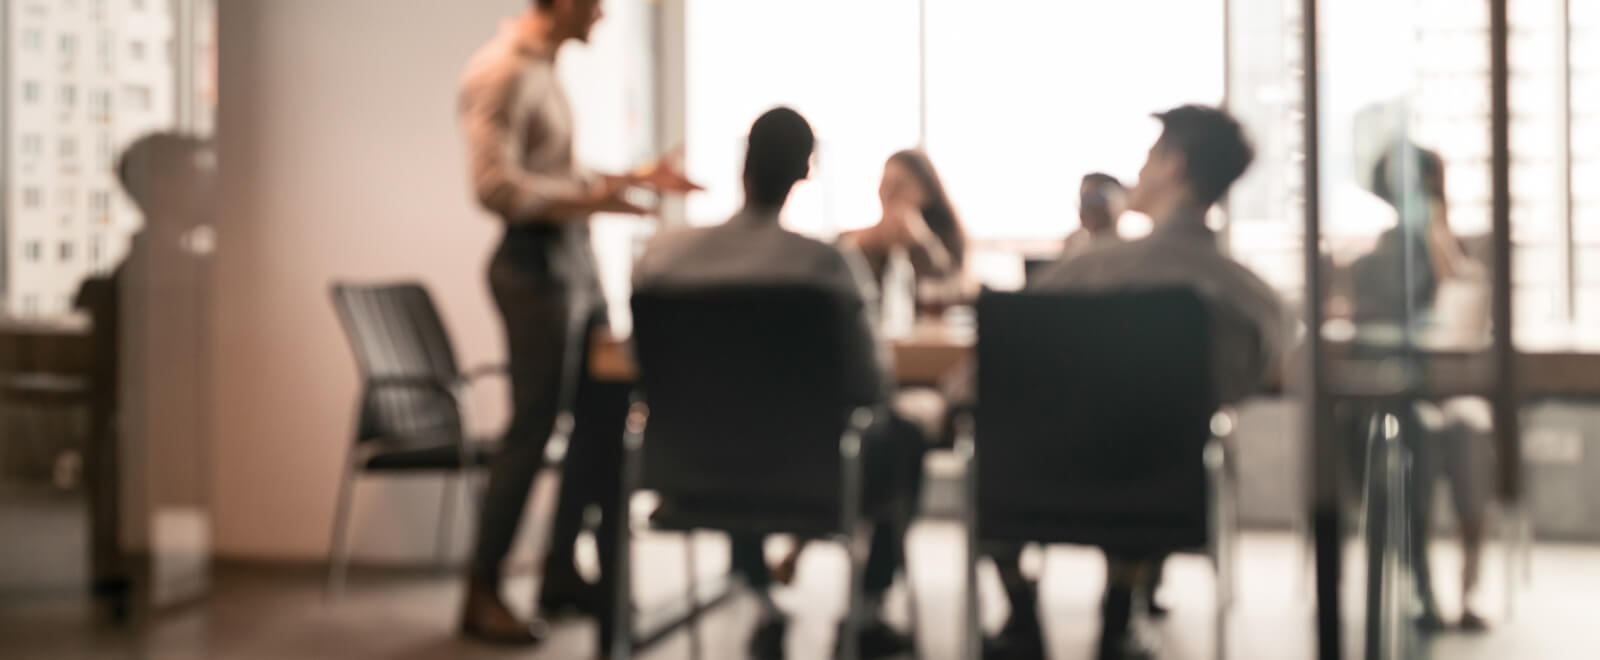 Out-of-focus shot of a group of people in a business meeting